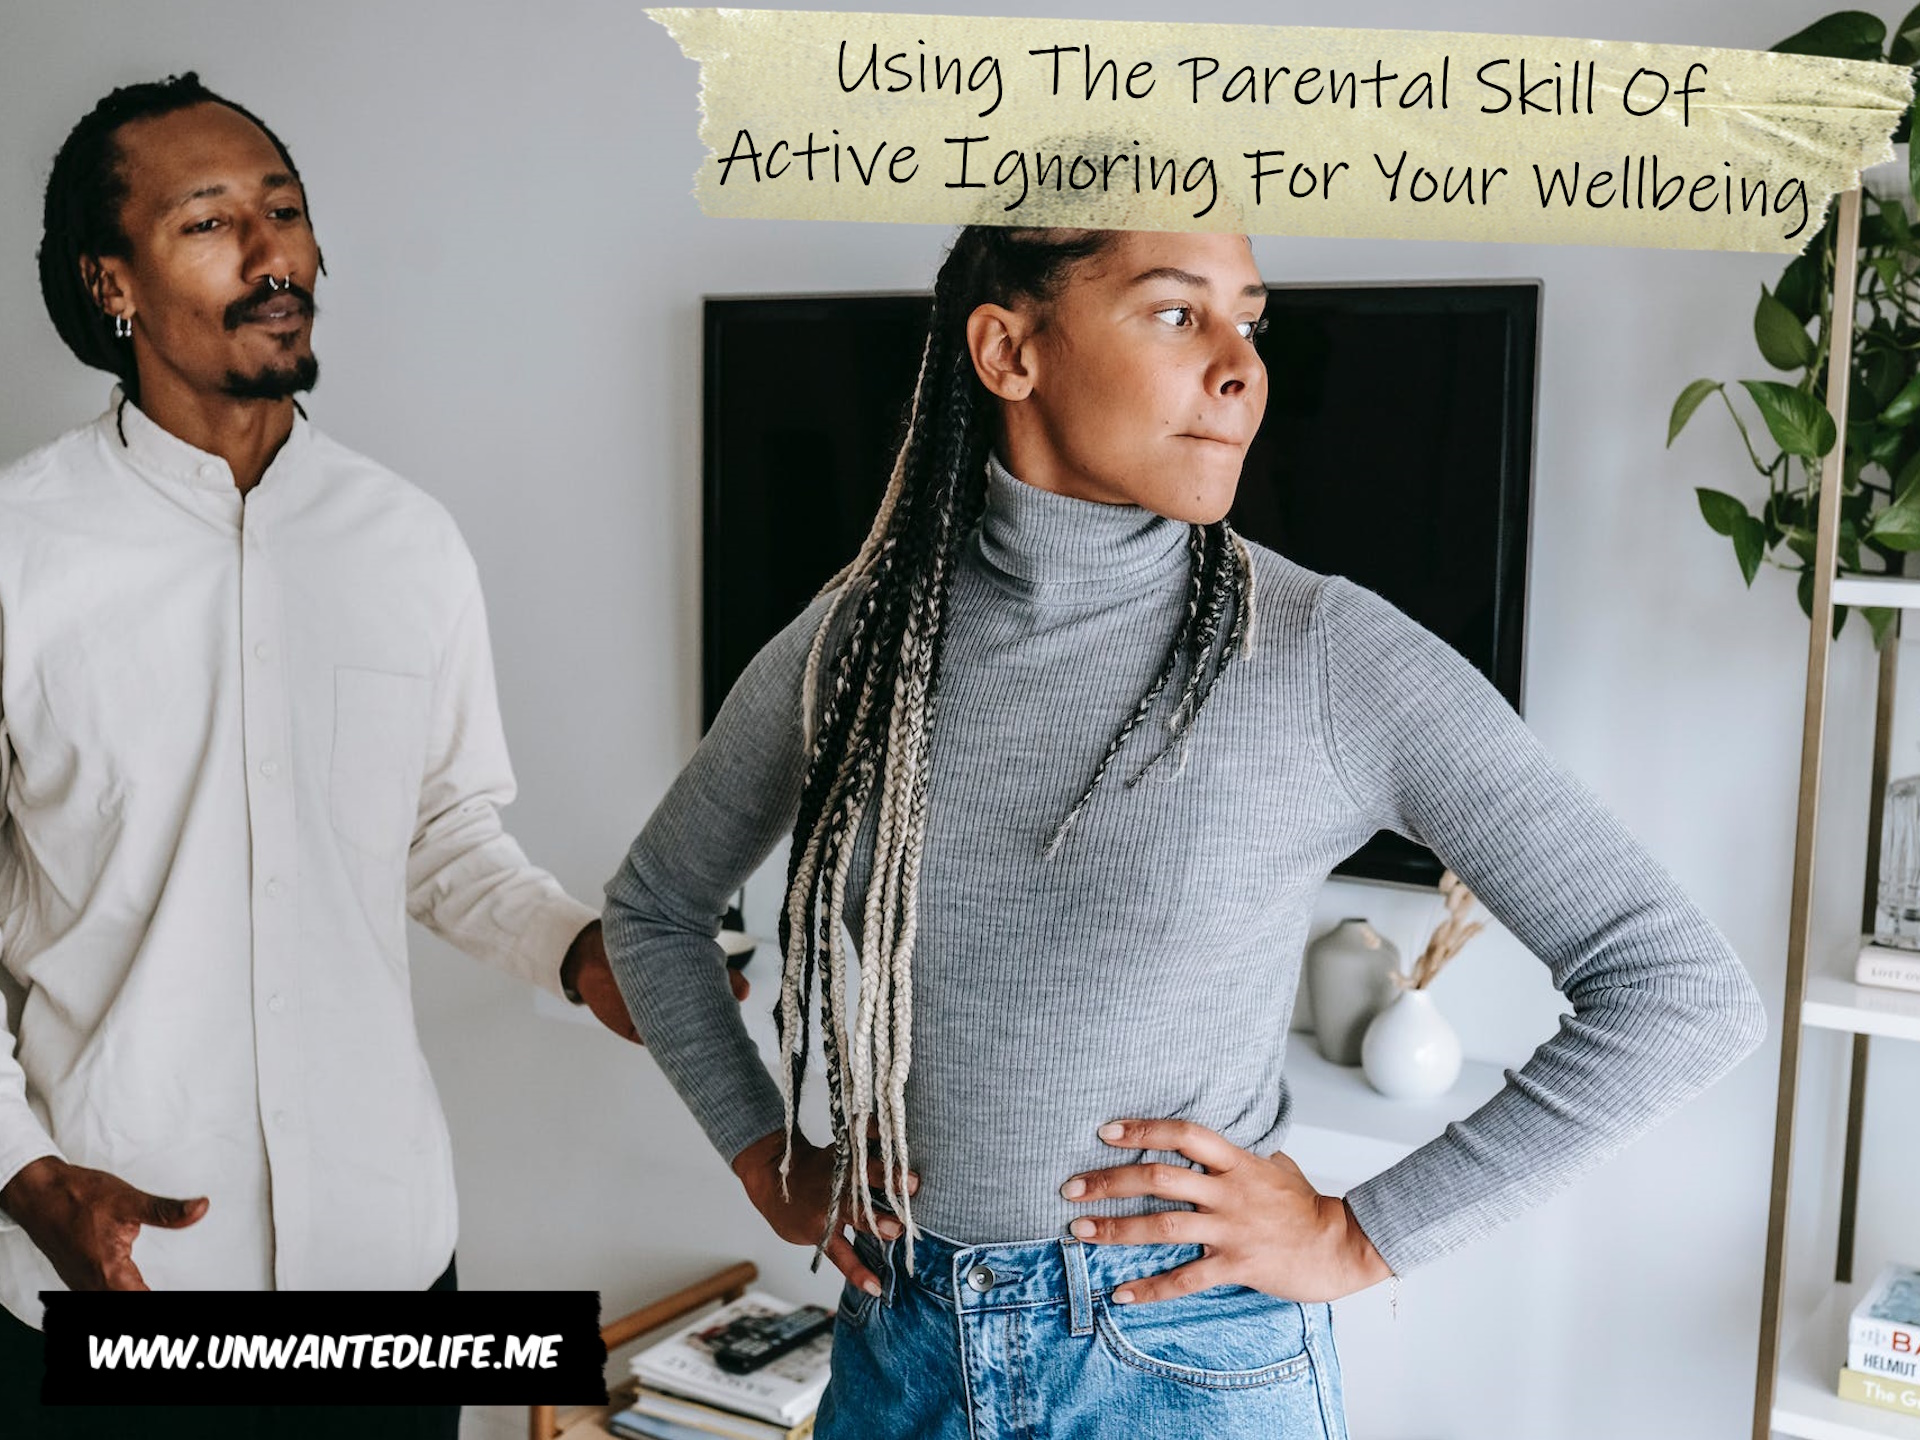 A photo of a Black man trying to talk to their partner who is ignoring them, to represent the topic of the article - Using The Parental Skill Of Active Ignoring For Your Wellbeing